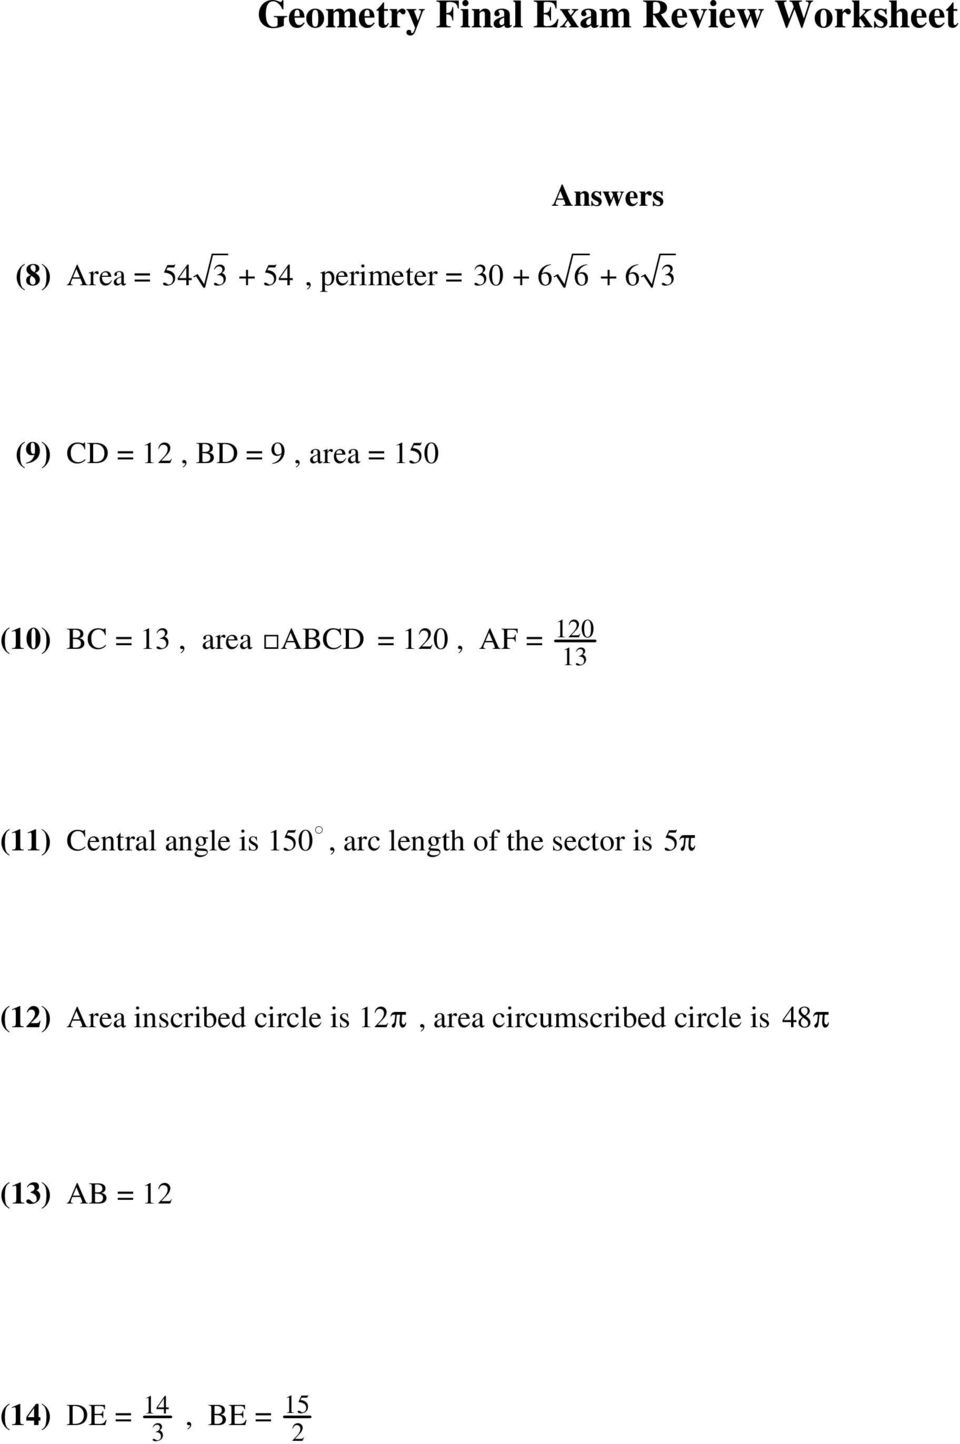 (11) entral angle is 150, arc length of the sector is 5π (12) rea